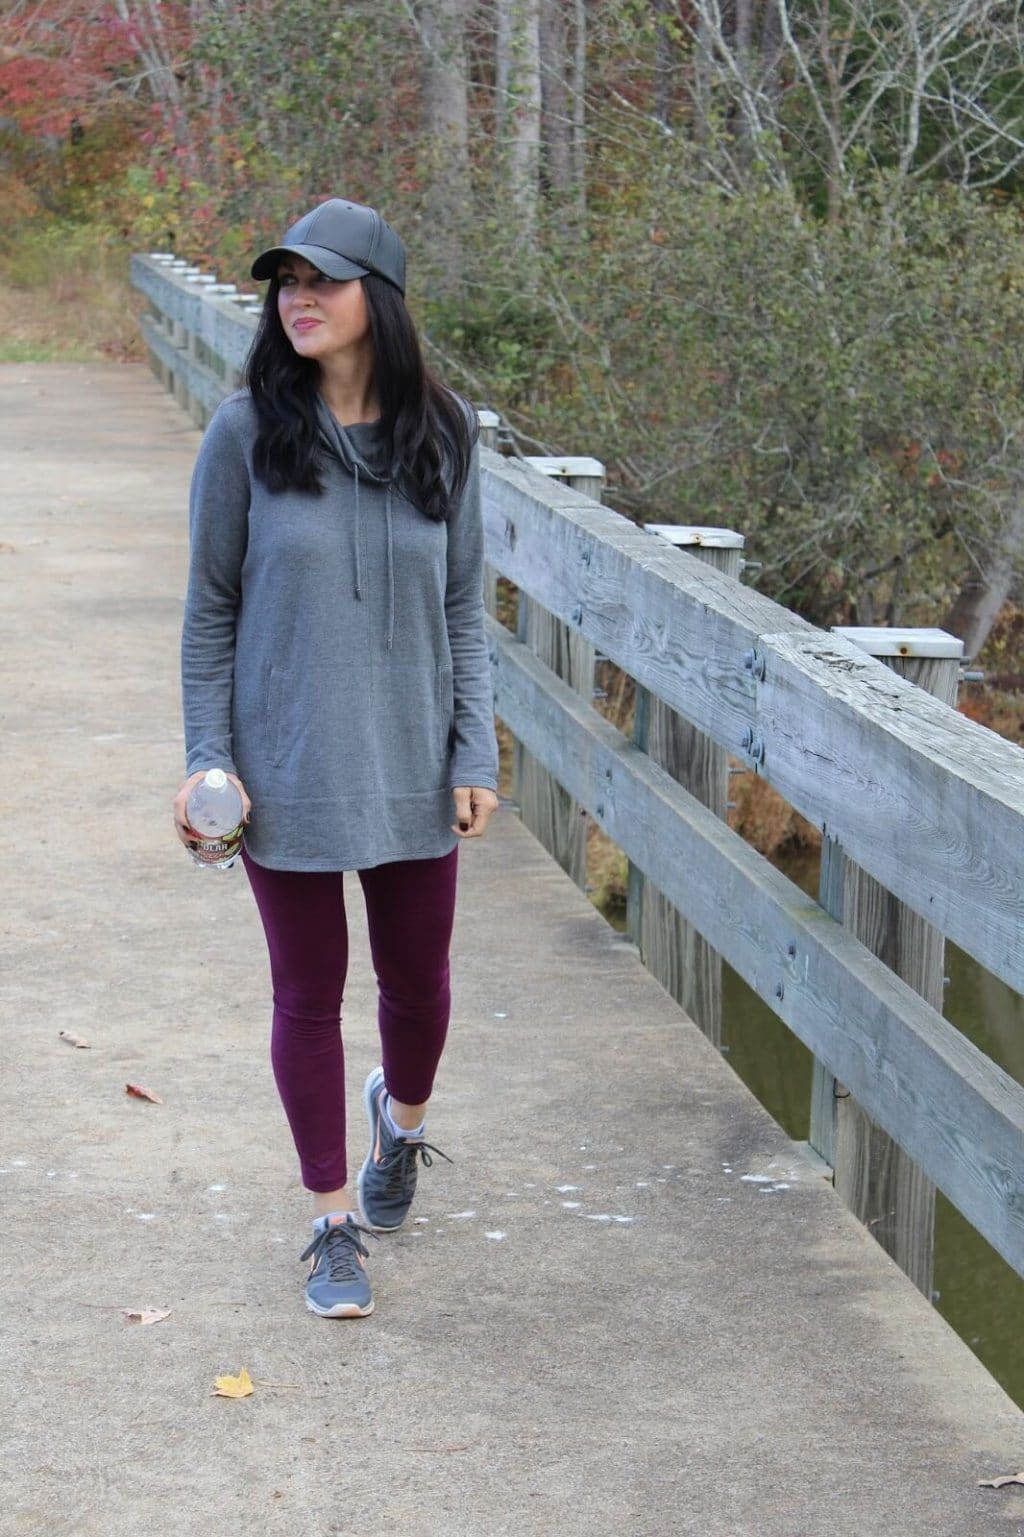 How to wear athleisure outfit with a hat